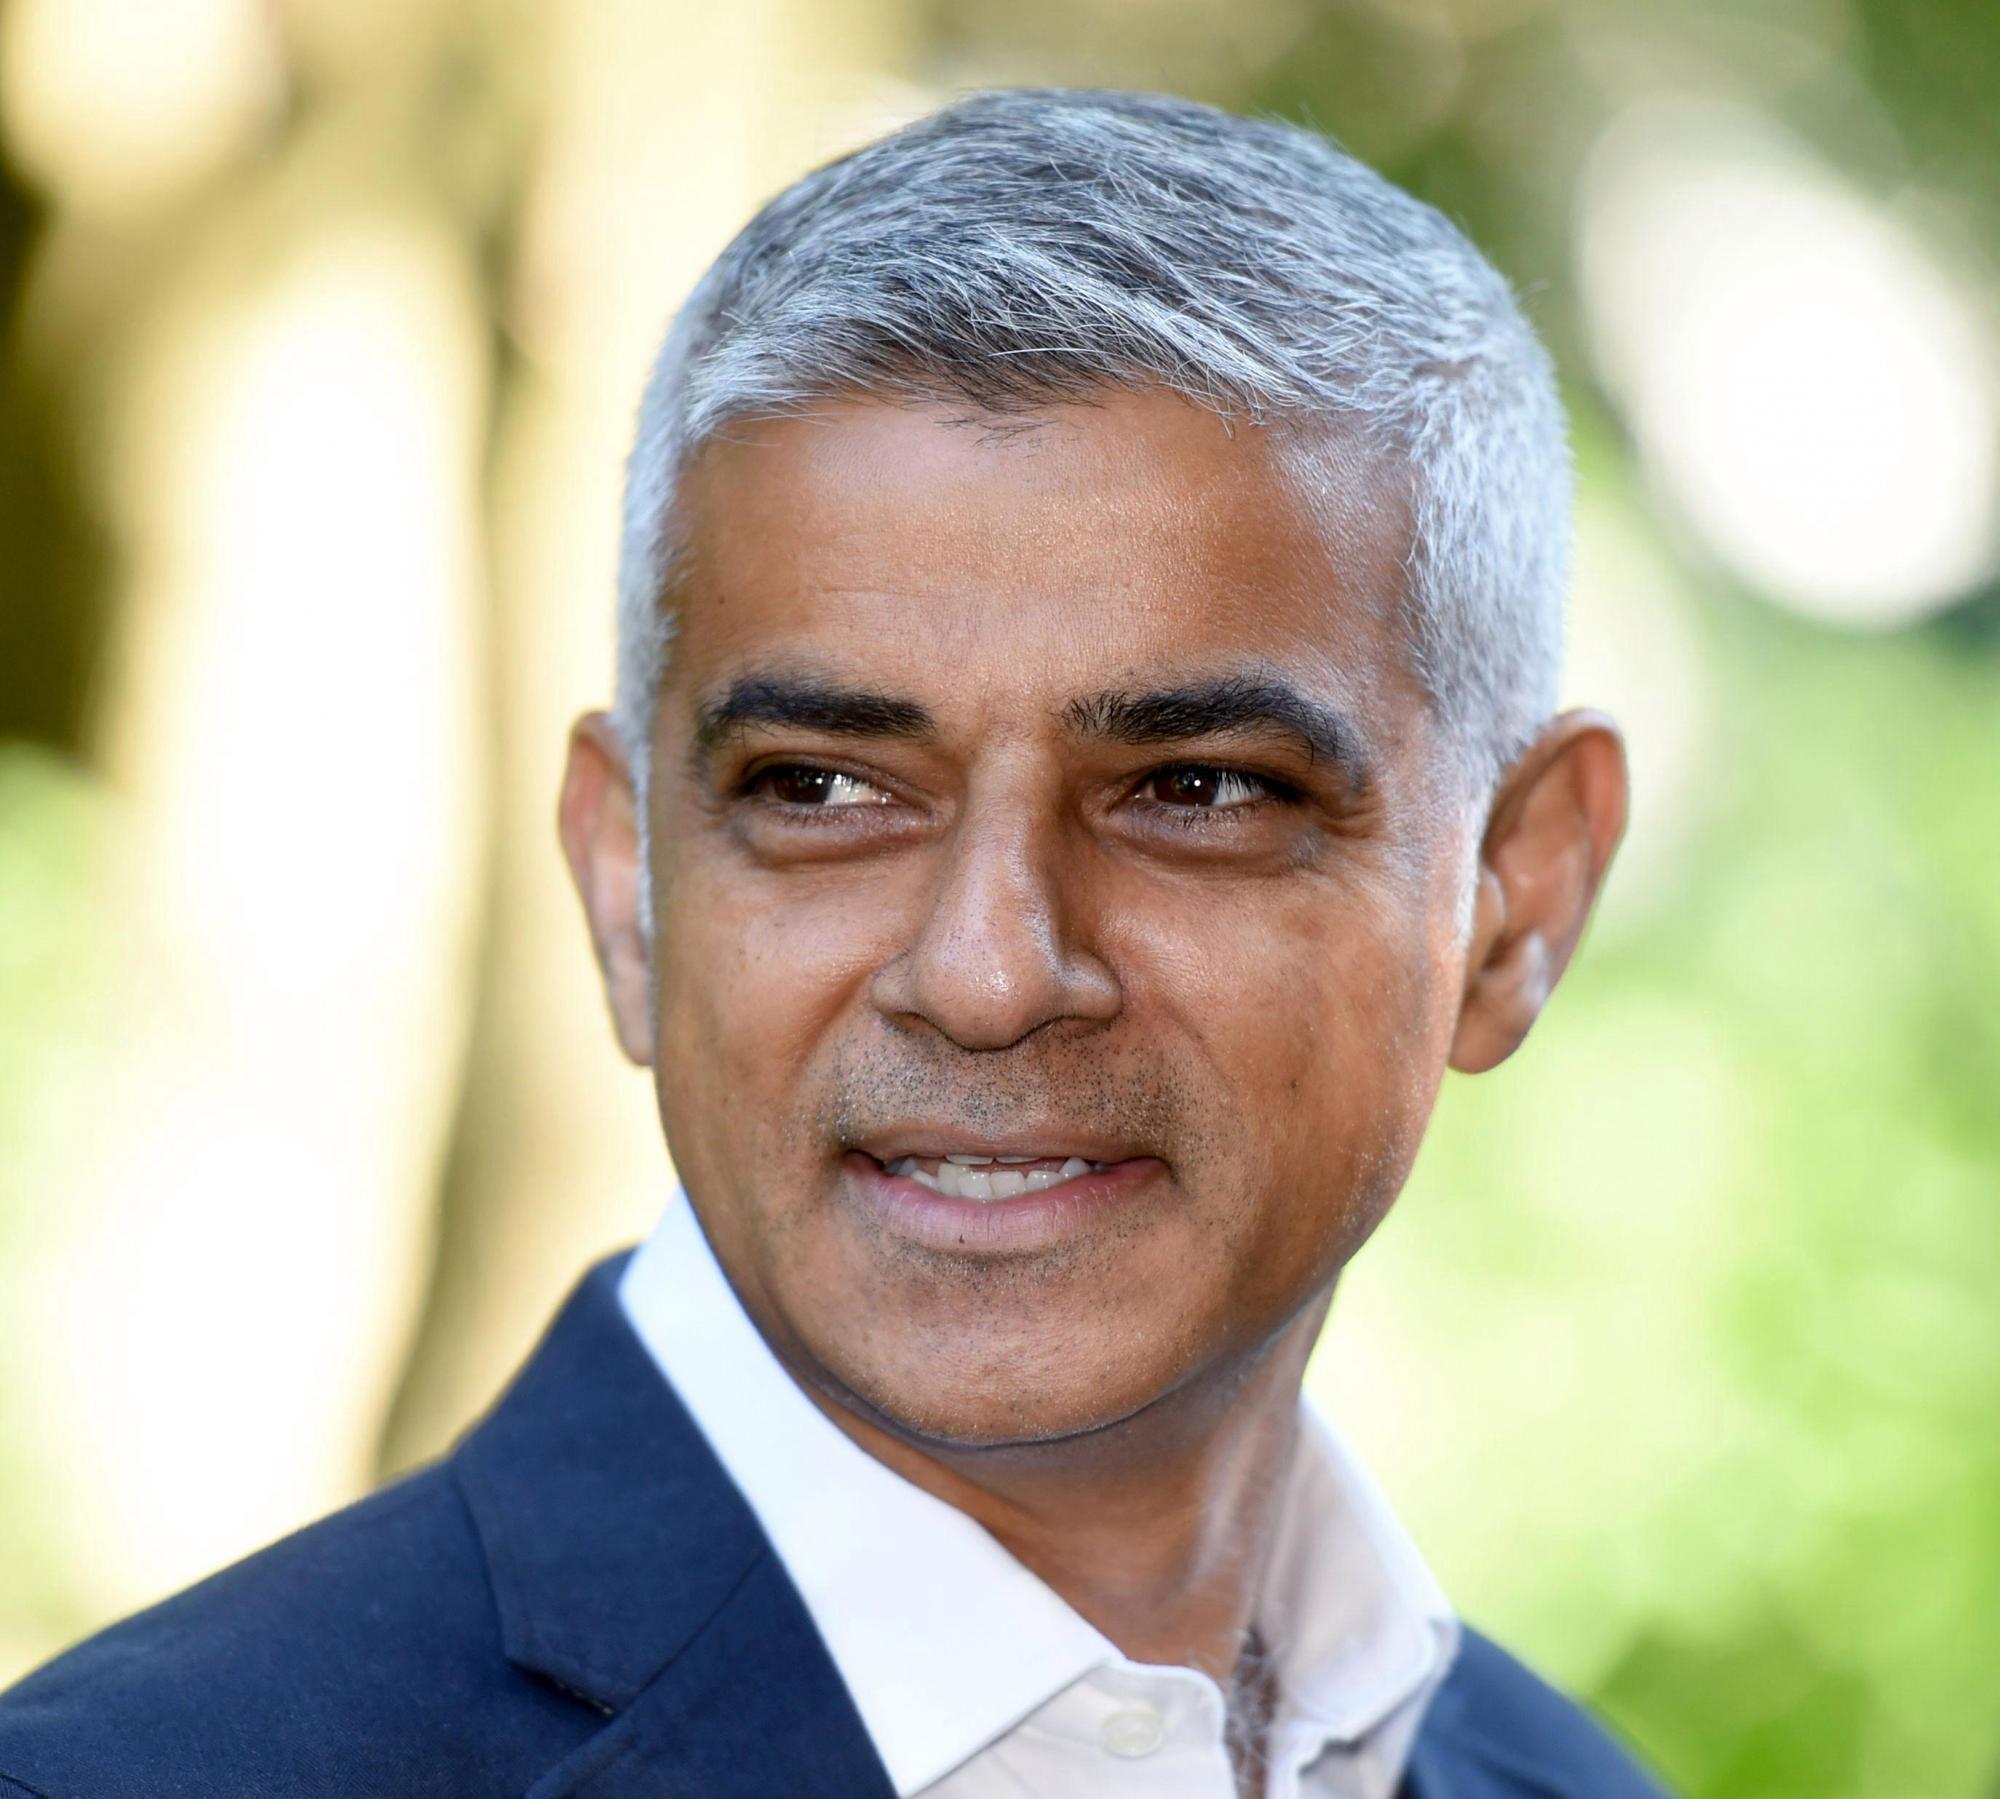 Sadiq Khan is the Member of Parliament for Tooting